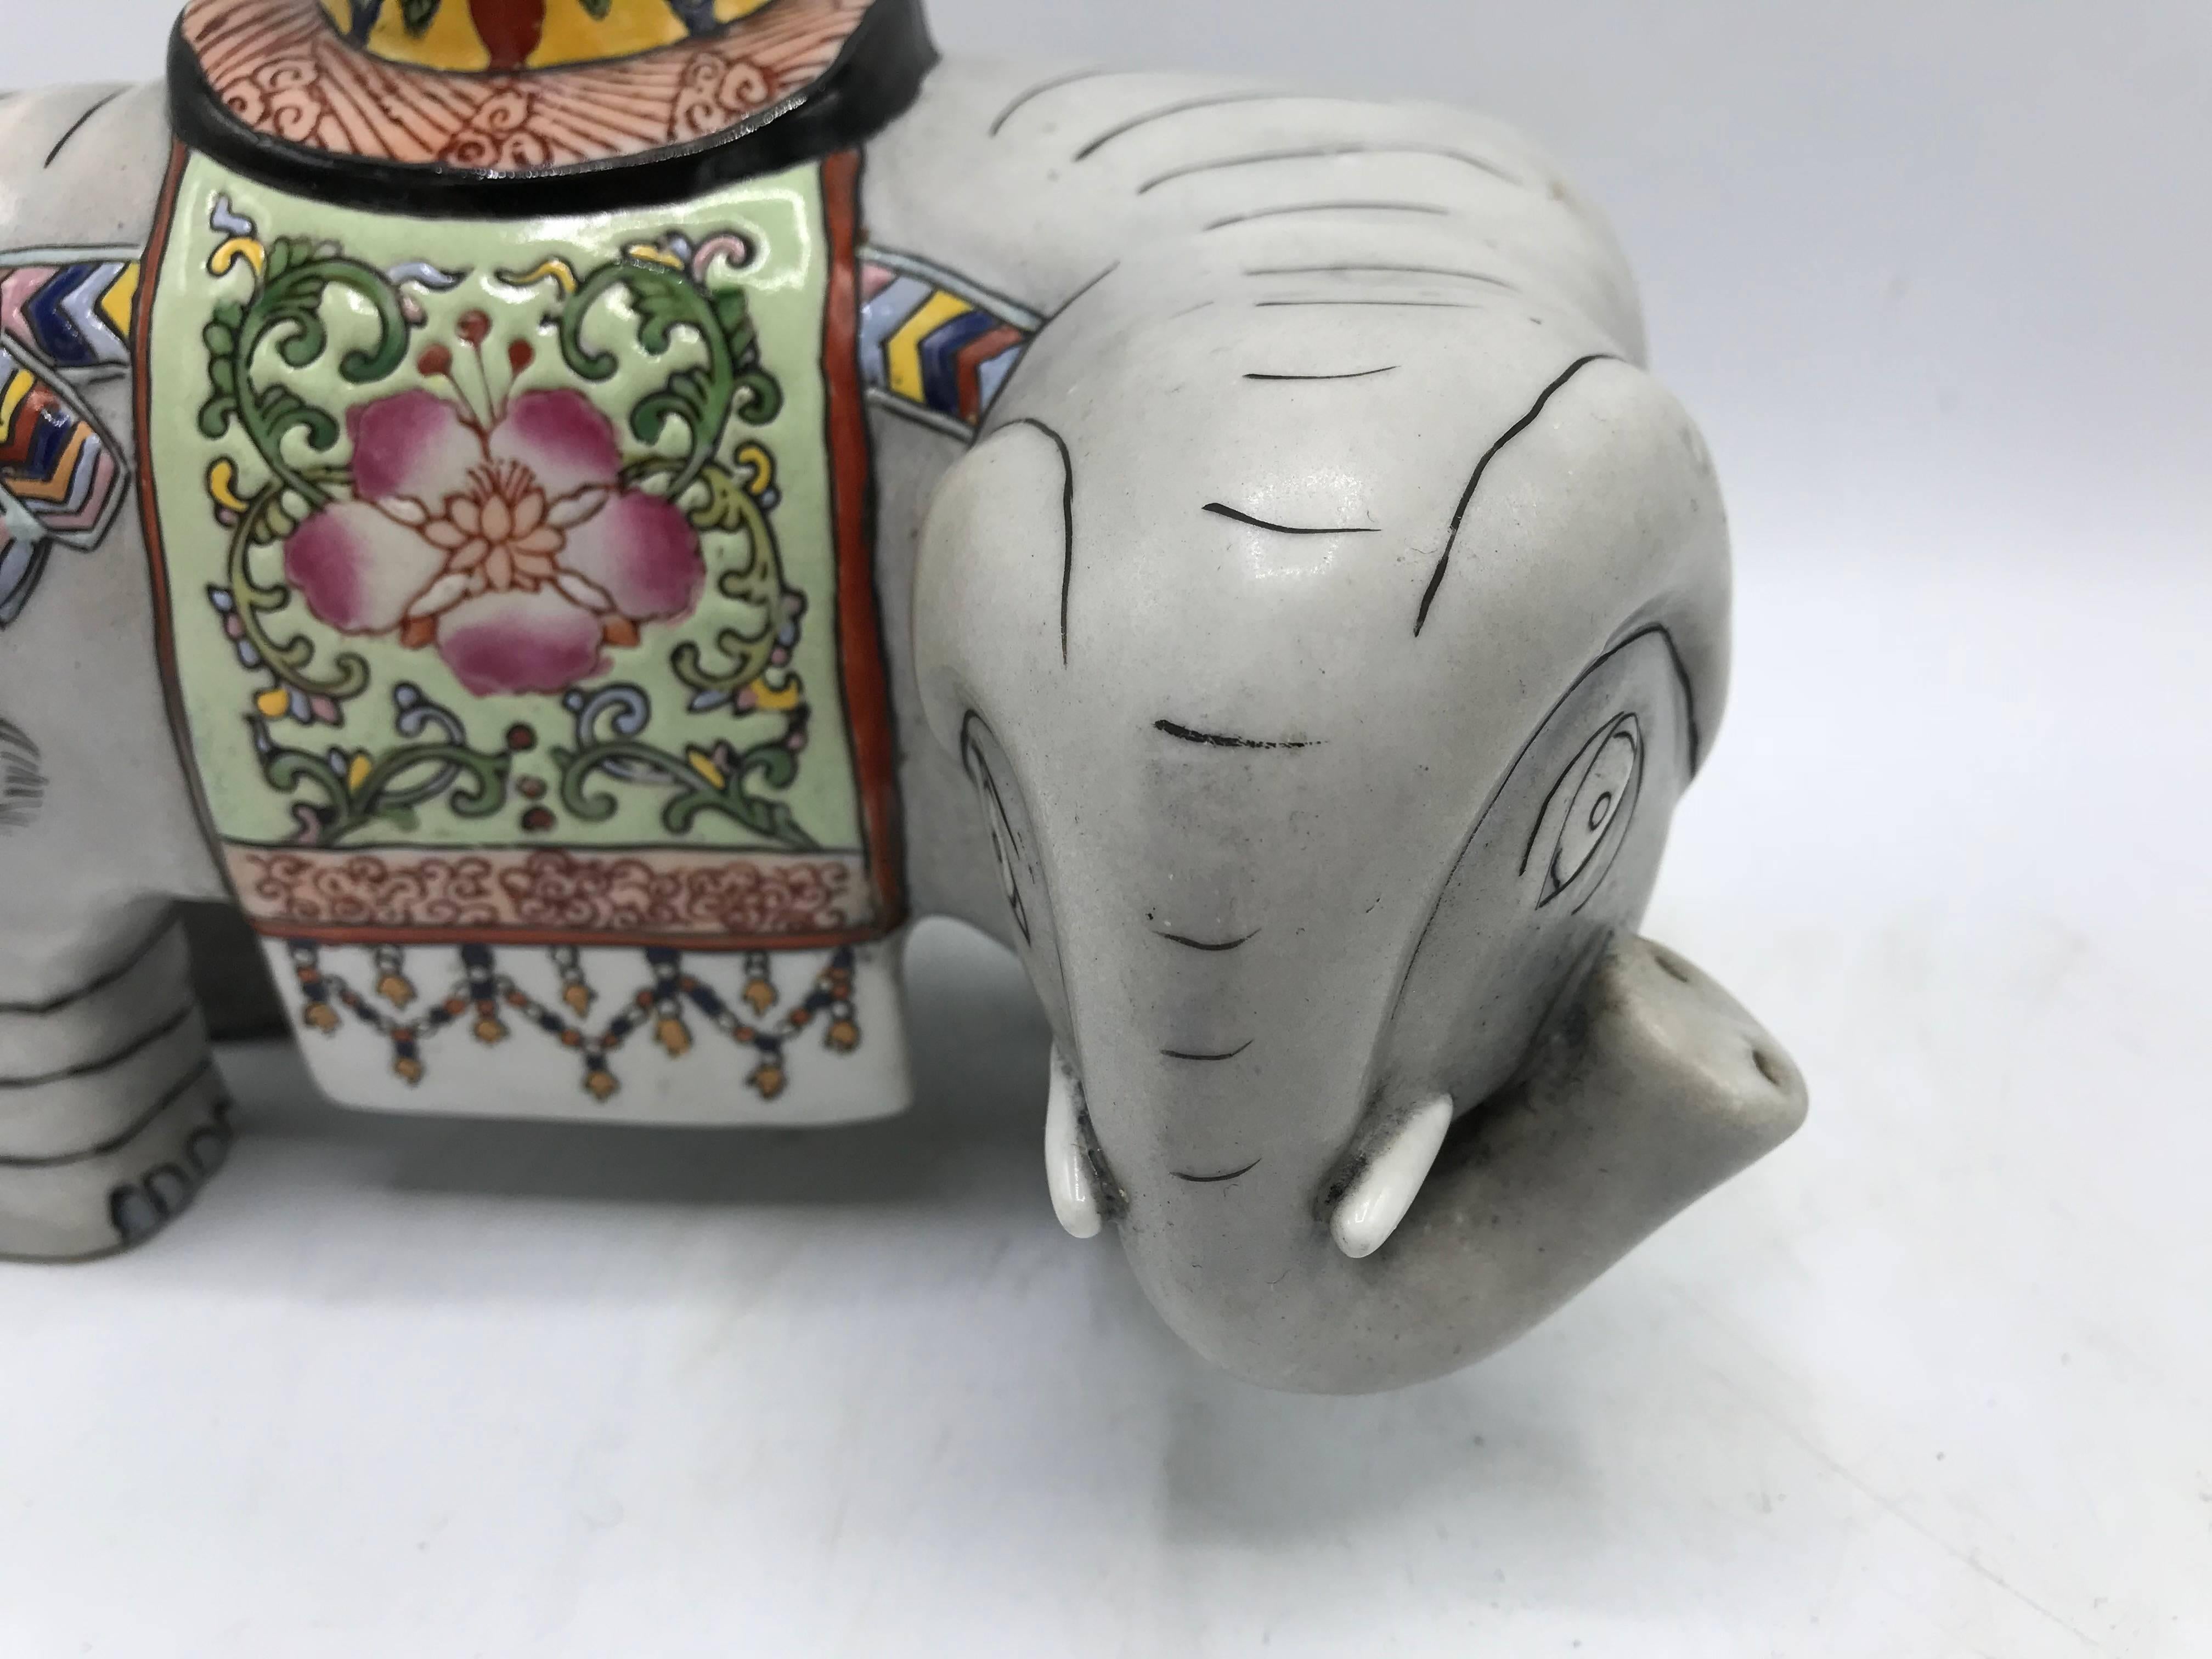 1960s Polychrome Ceramic Elephant Sculpture Candlestick Holders, Pair In Good Condition For Sale In Richmond, VA